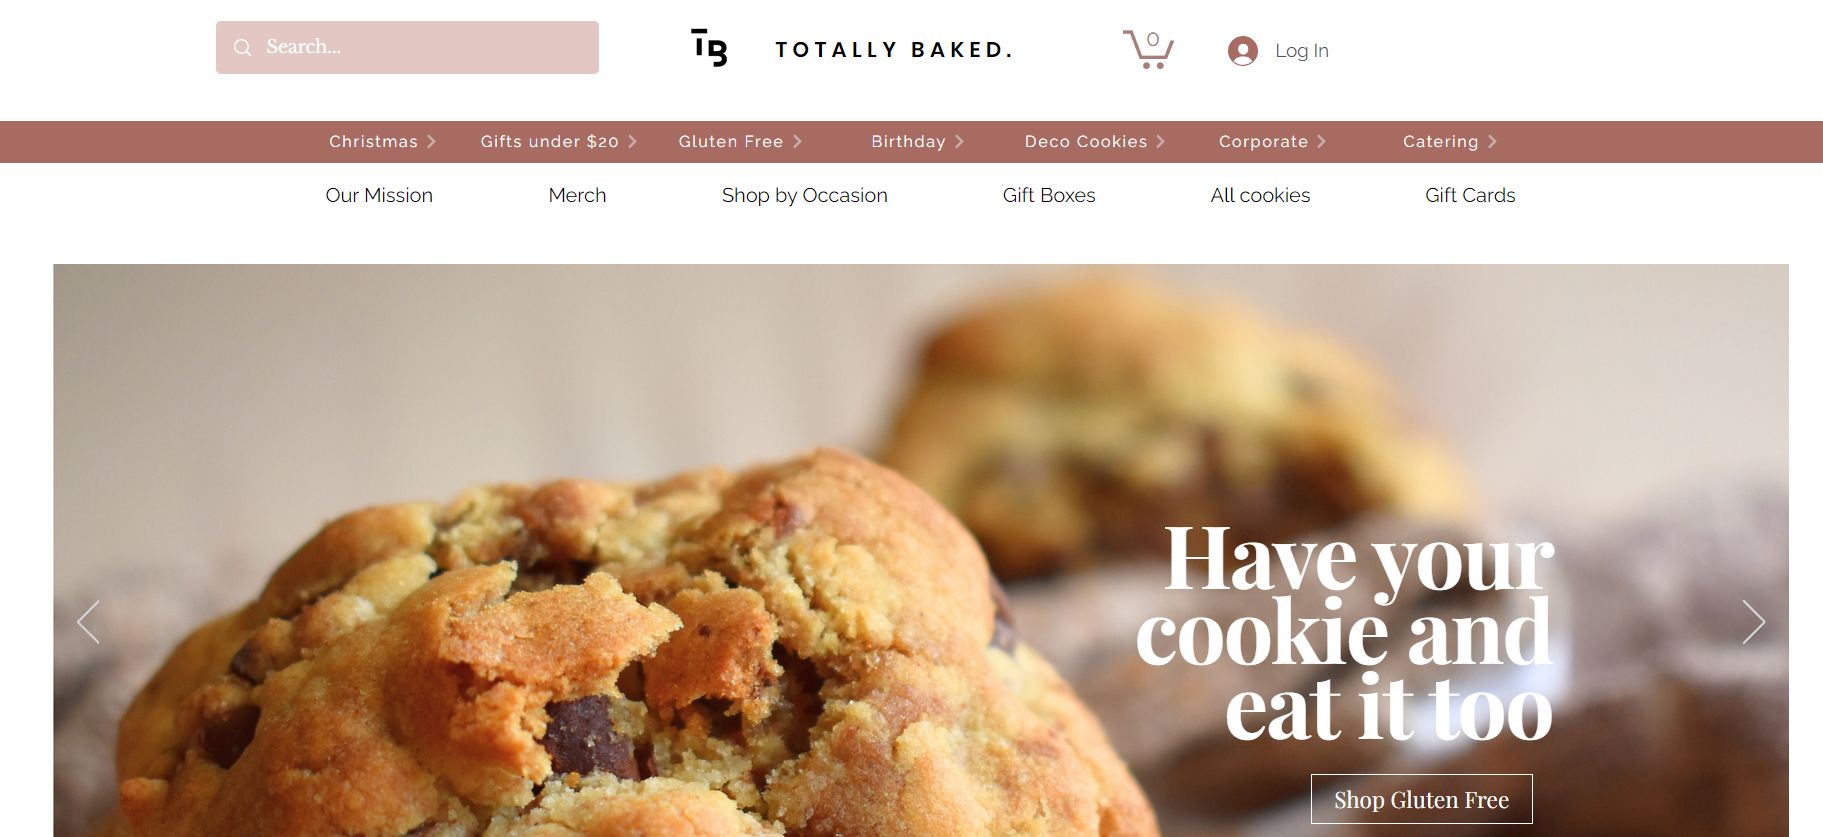 Screenshot of Totally Baked Sweet Shoppe's website homepage, featuring new service line additions.